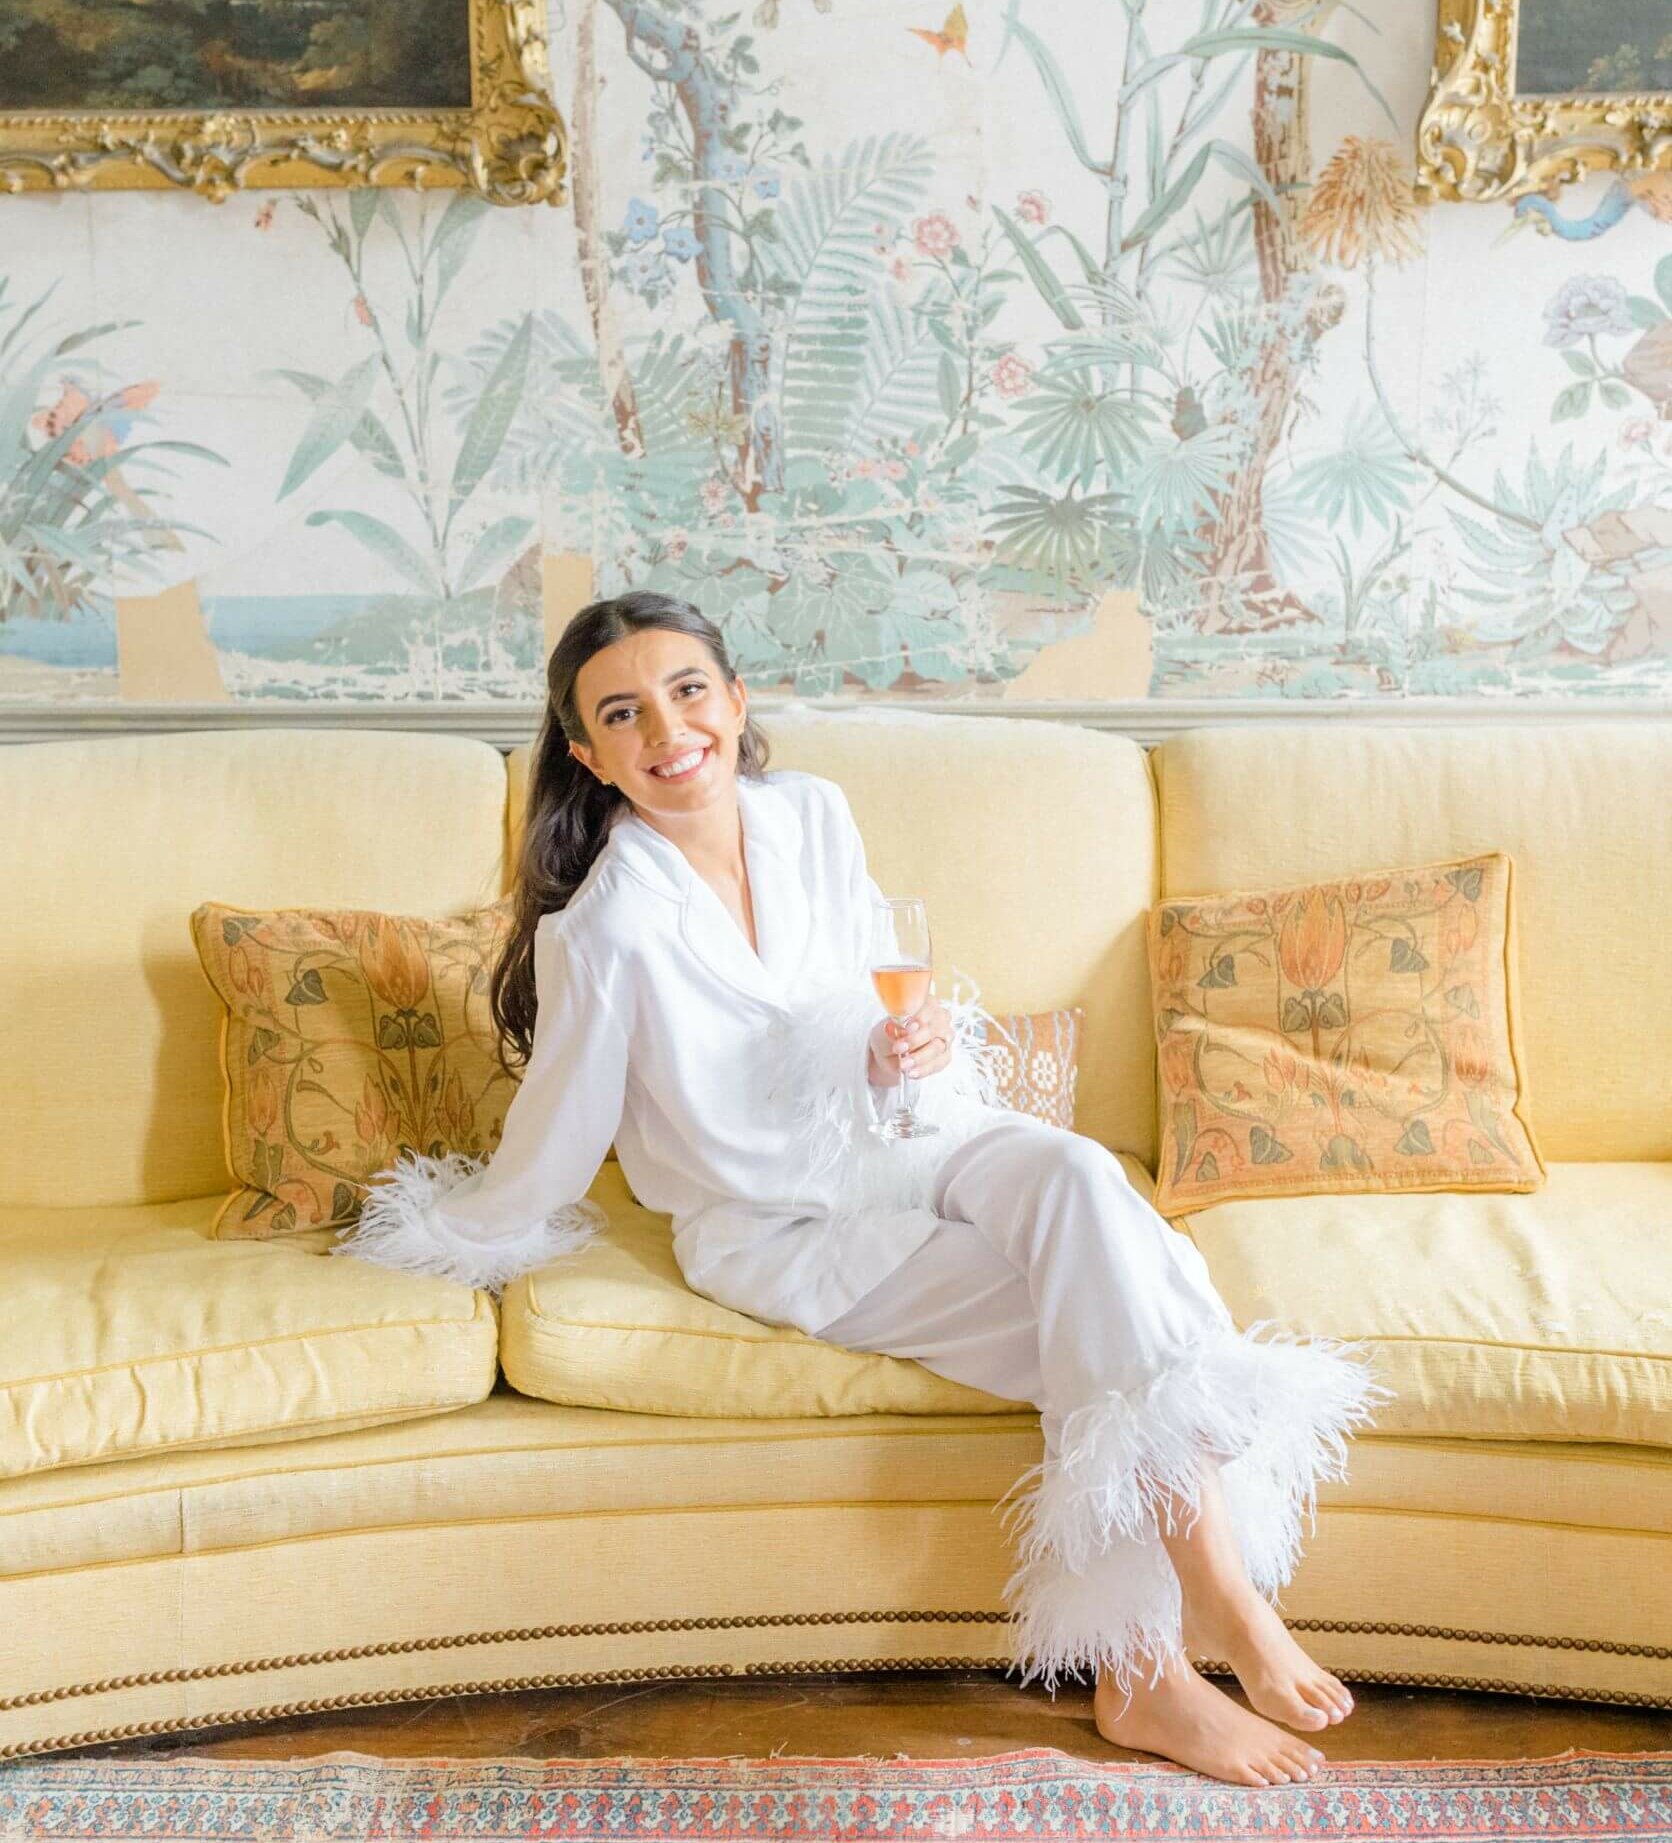 A beaming bride in white feather cuffed pyjamas lounges on an antique sofa in the Japan Room before getting ready for her wedding day